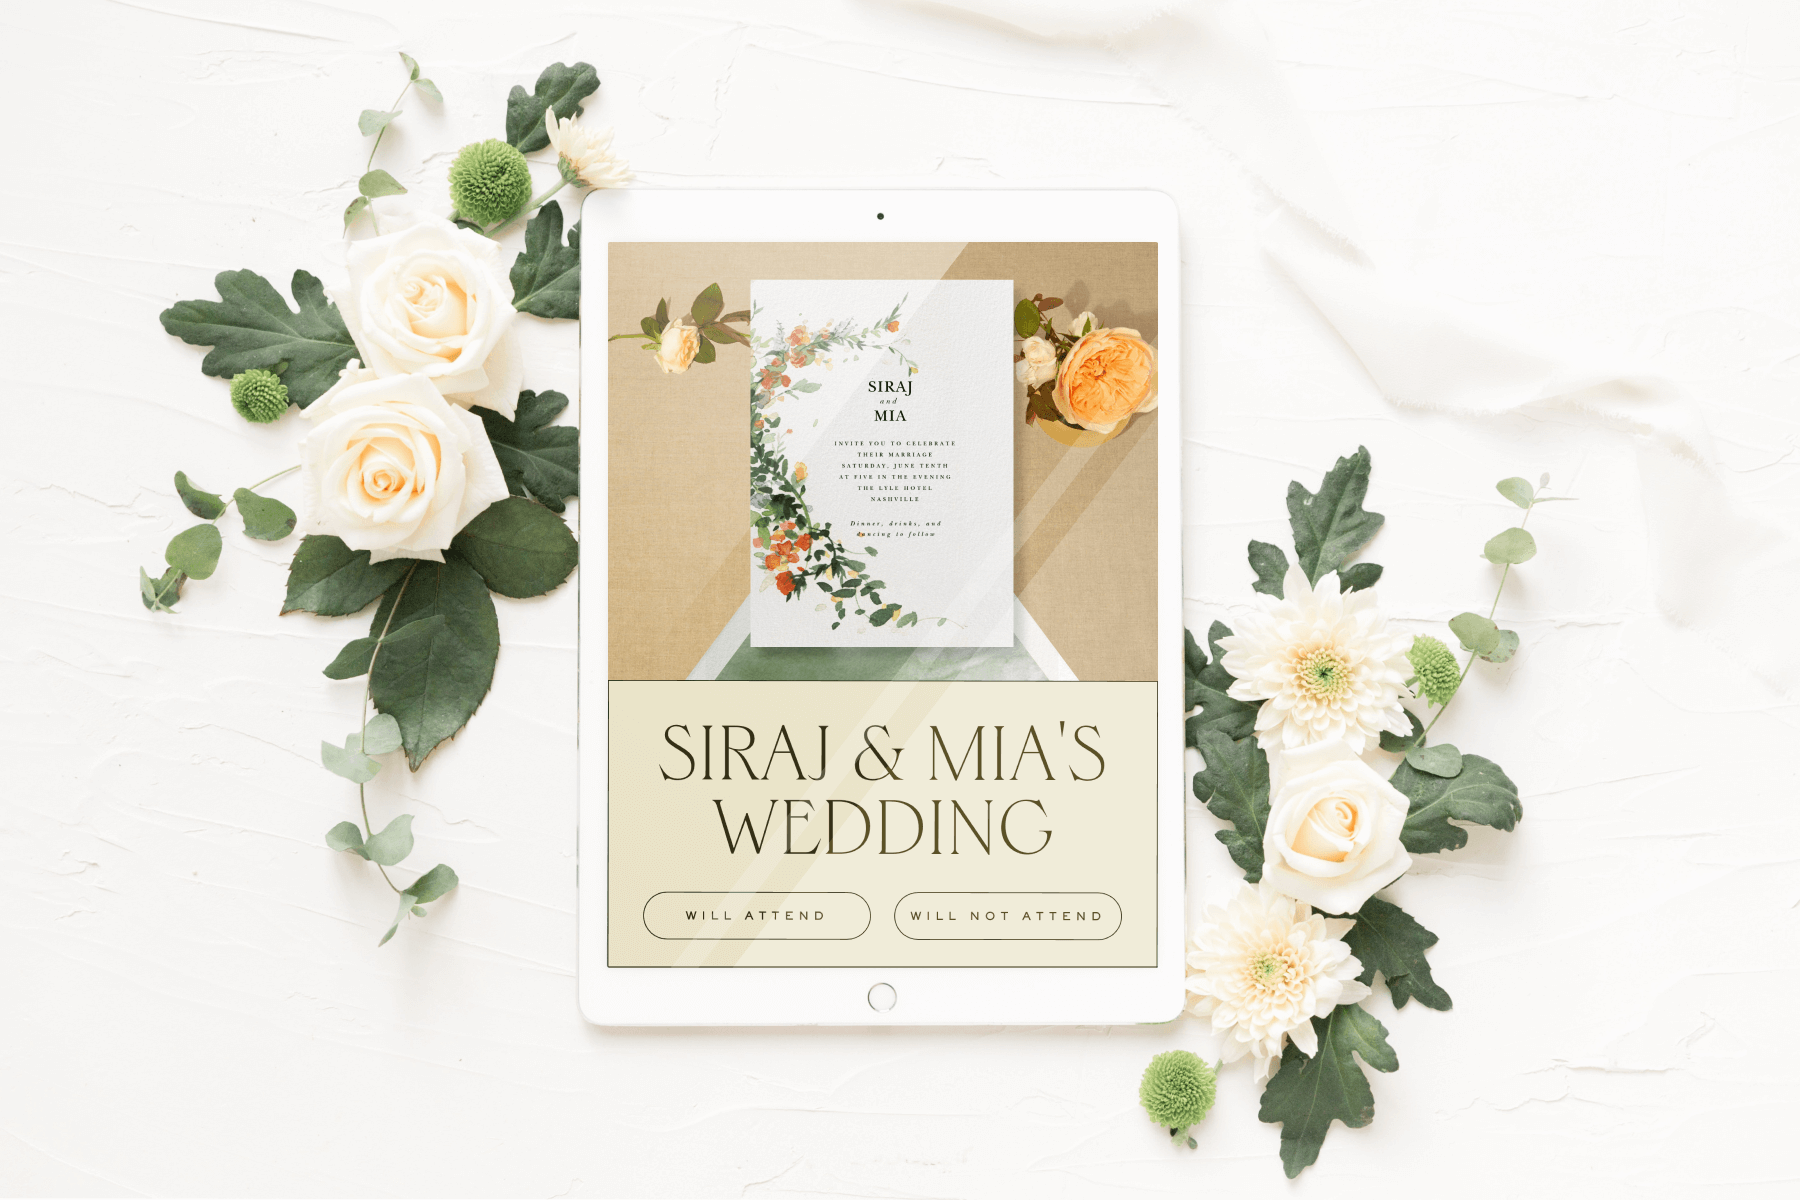 An iPad, flanked by airy flower arrangements, is opened to a Paperless Post wedding invitation and event page.